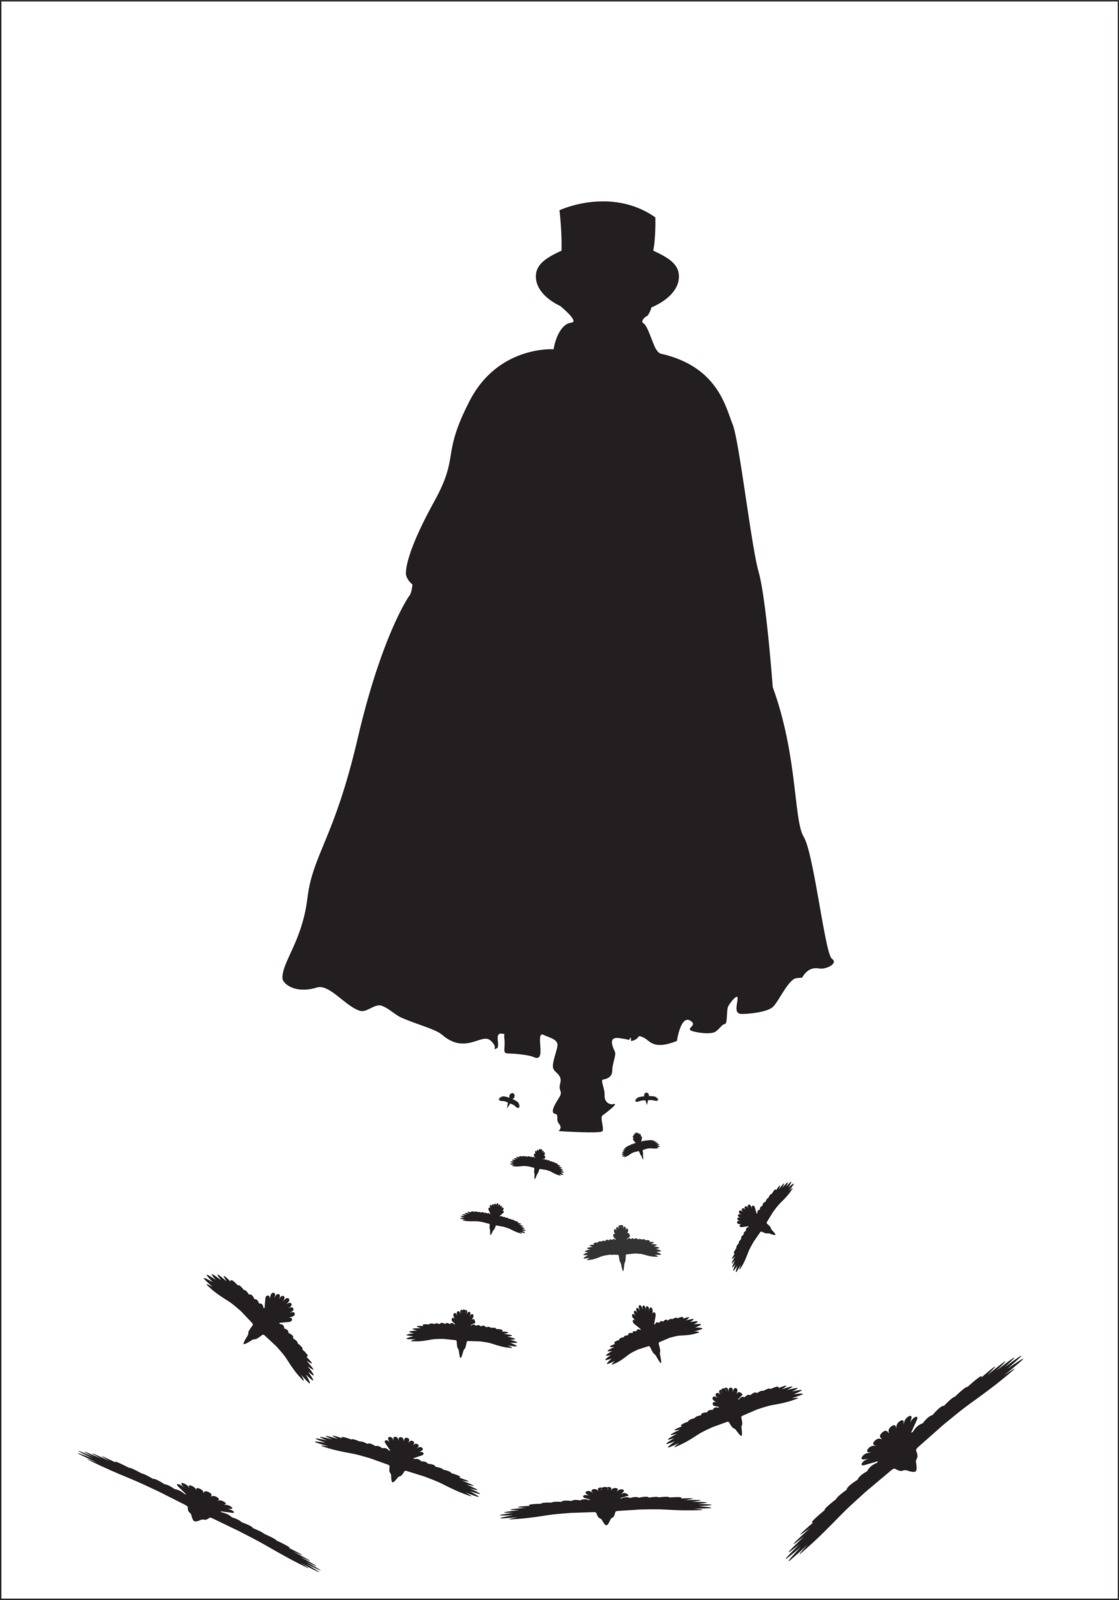 A silhouette of Jack the ripper walking with crows isolated on a white background